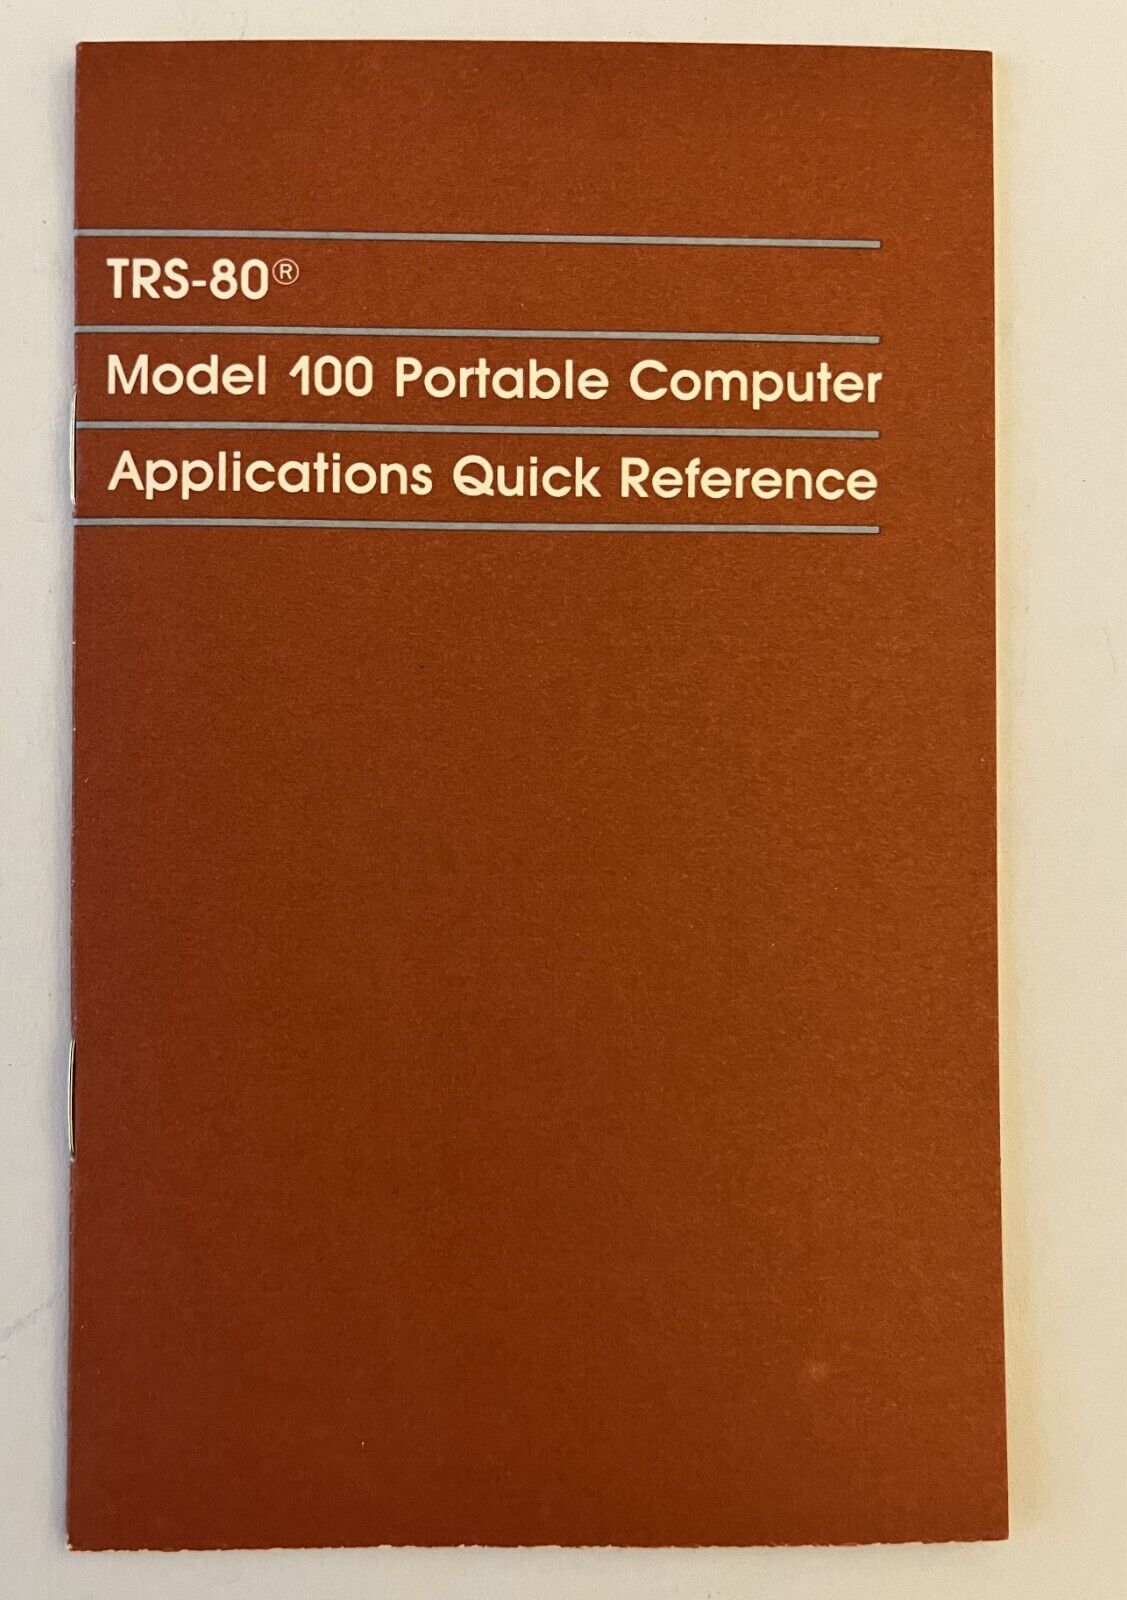 TRS-80 Model 100 Applications Quick Reference Tandy Radio Shack